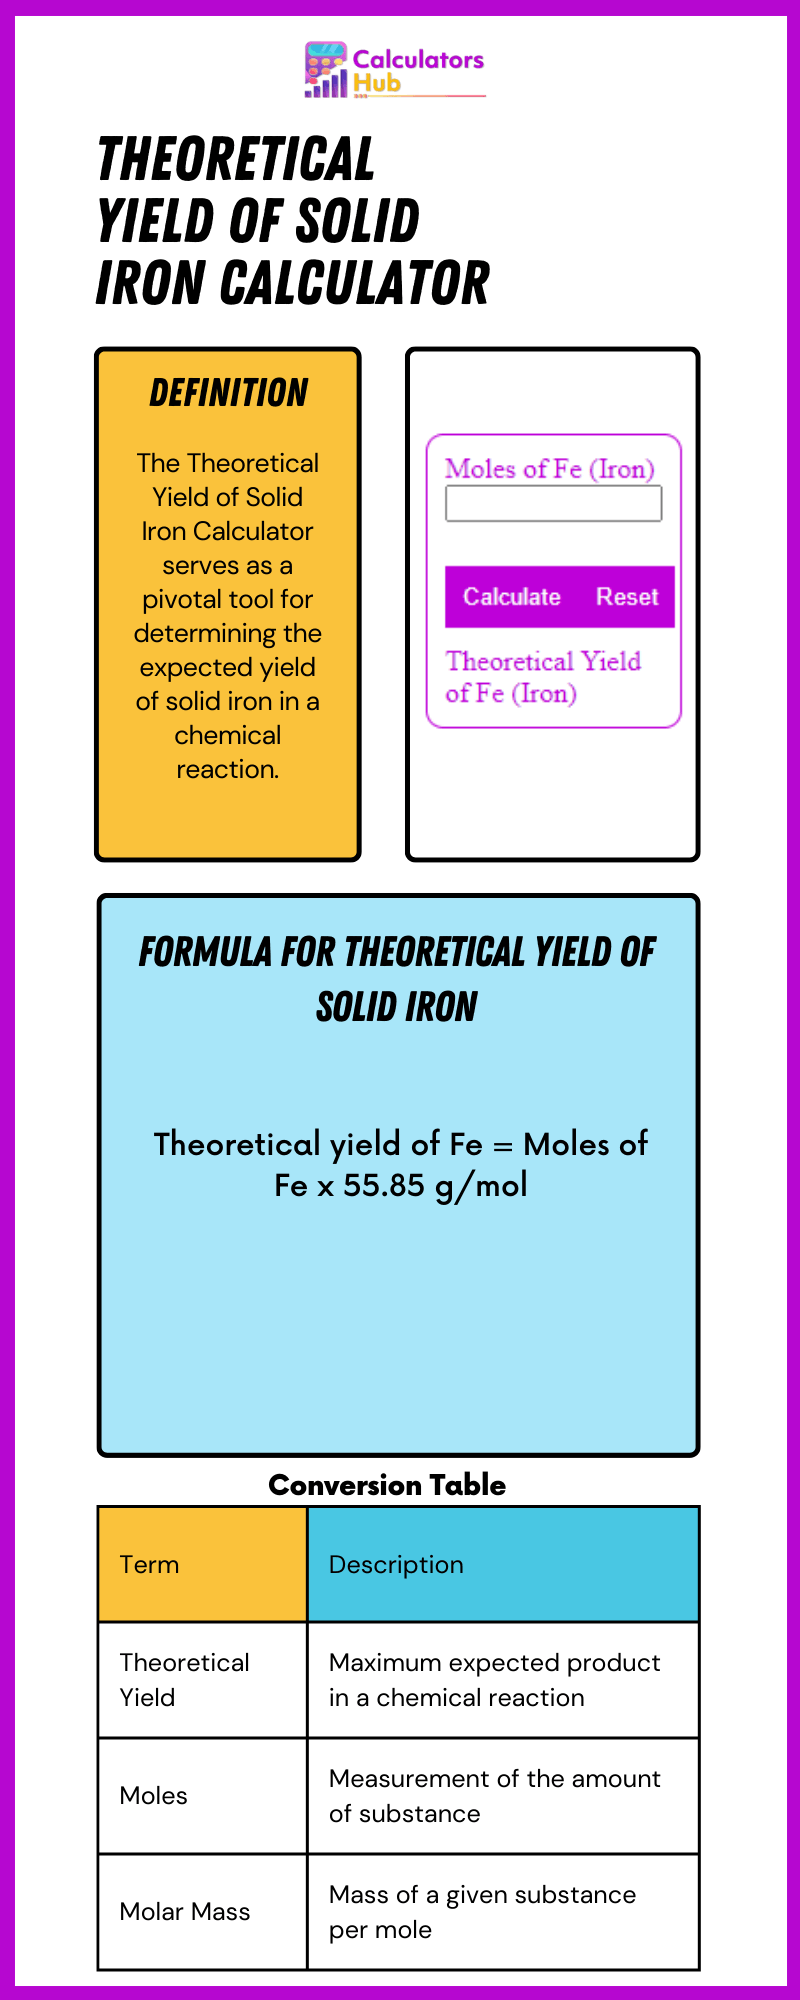 Theoretical Yield of Solid Iron Calculator